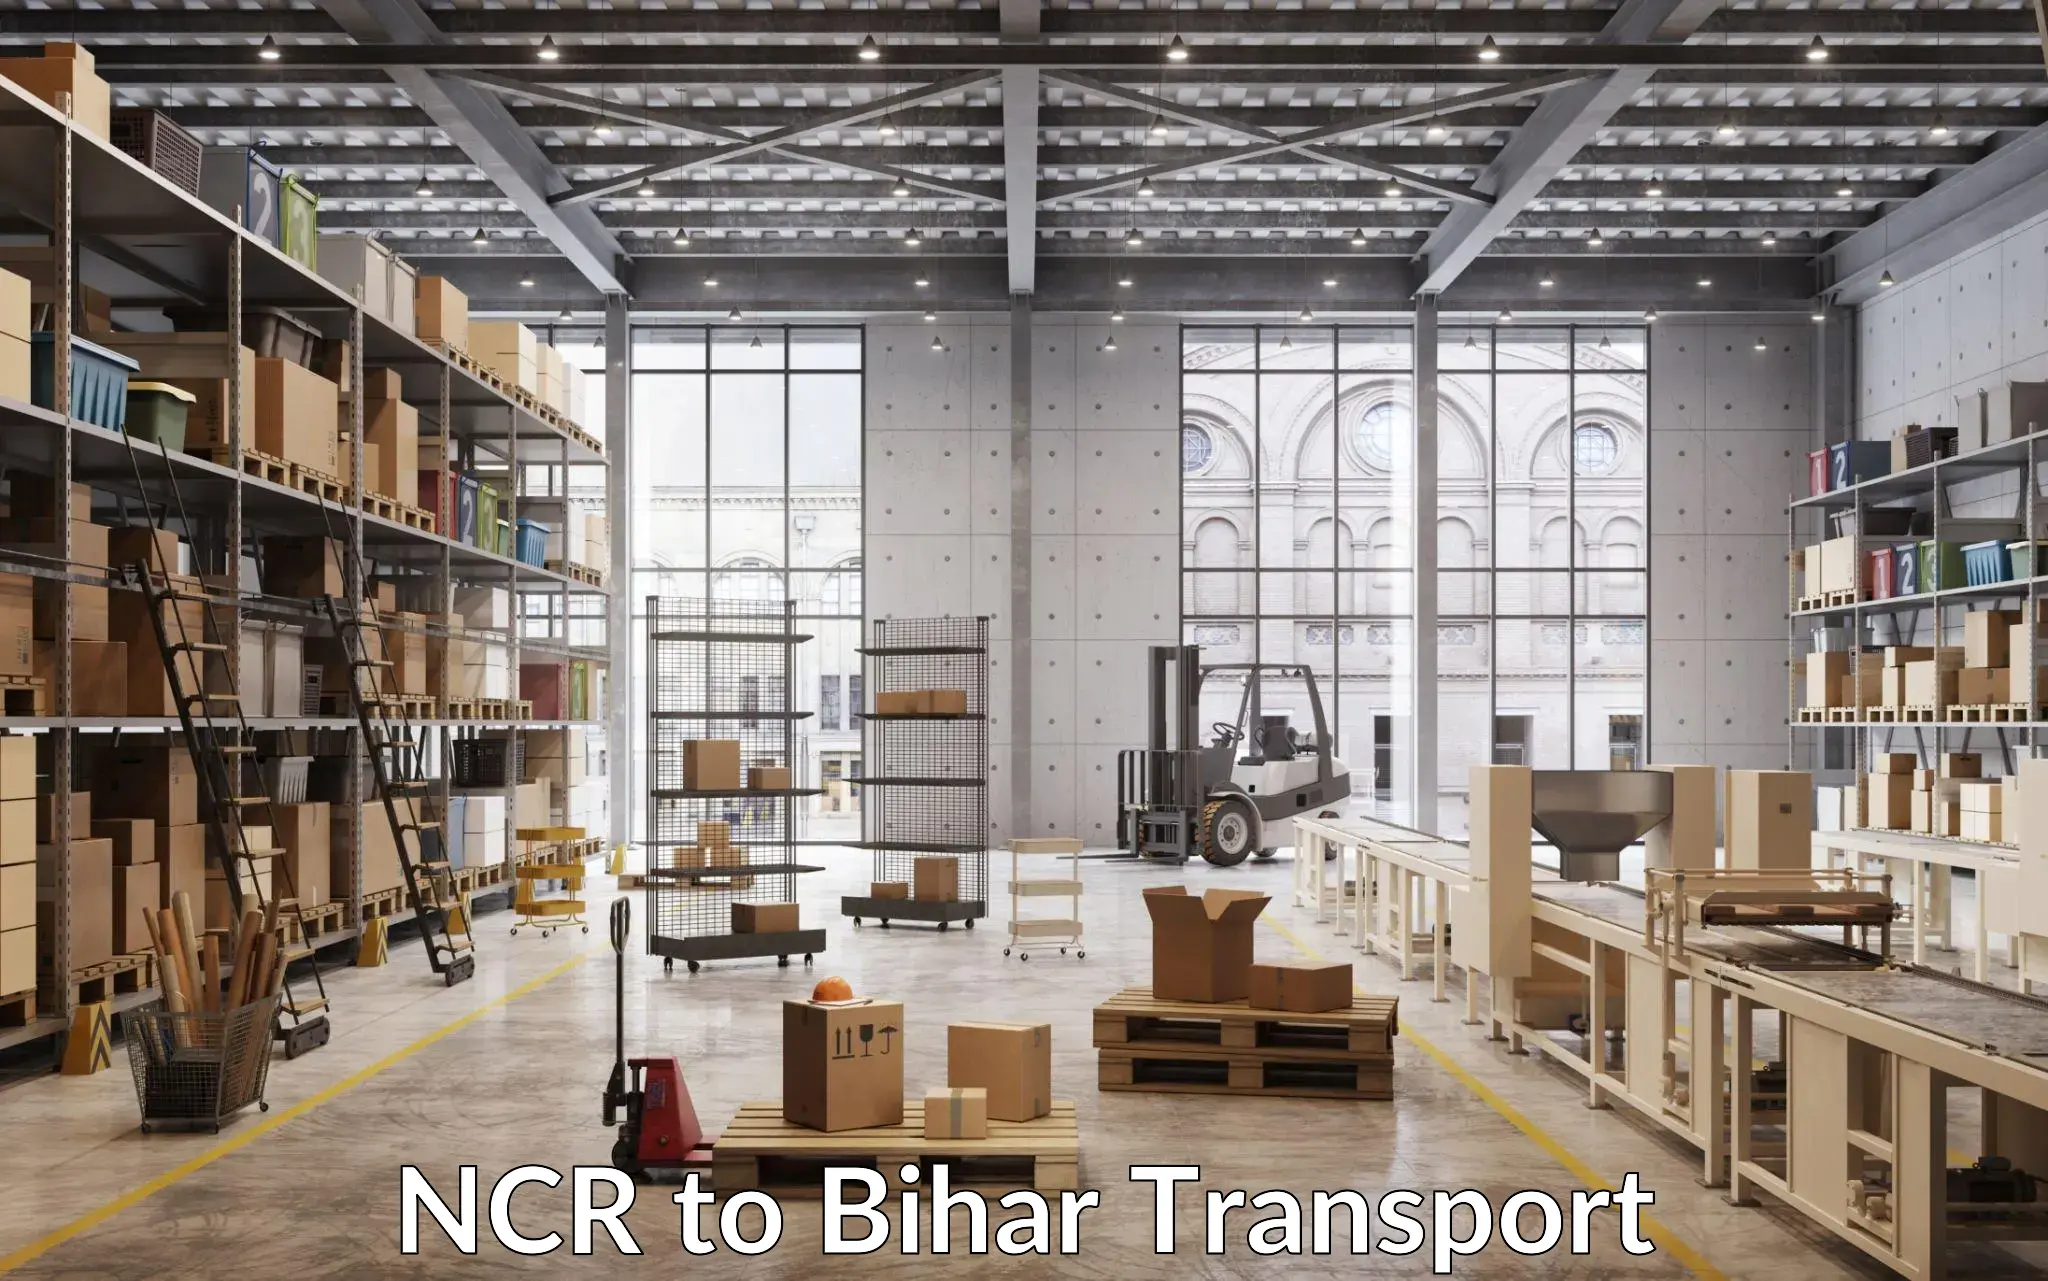 Container transport service NCR to Jevargi